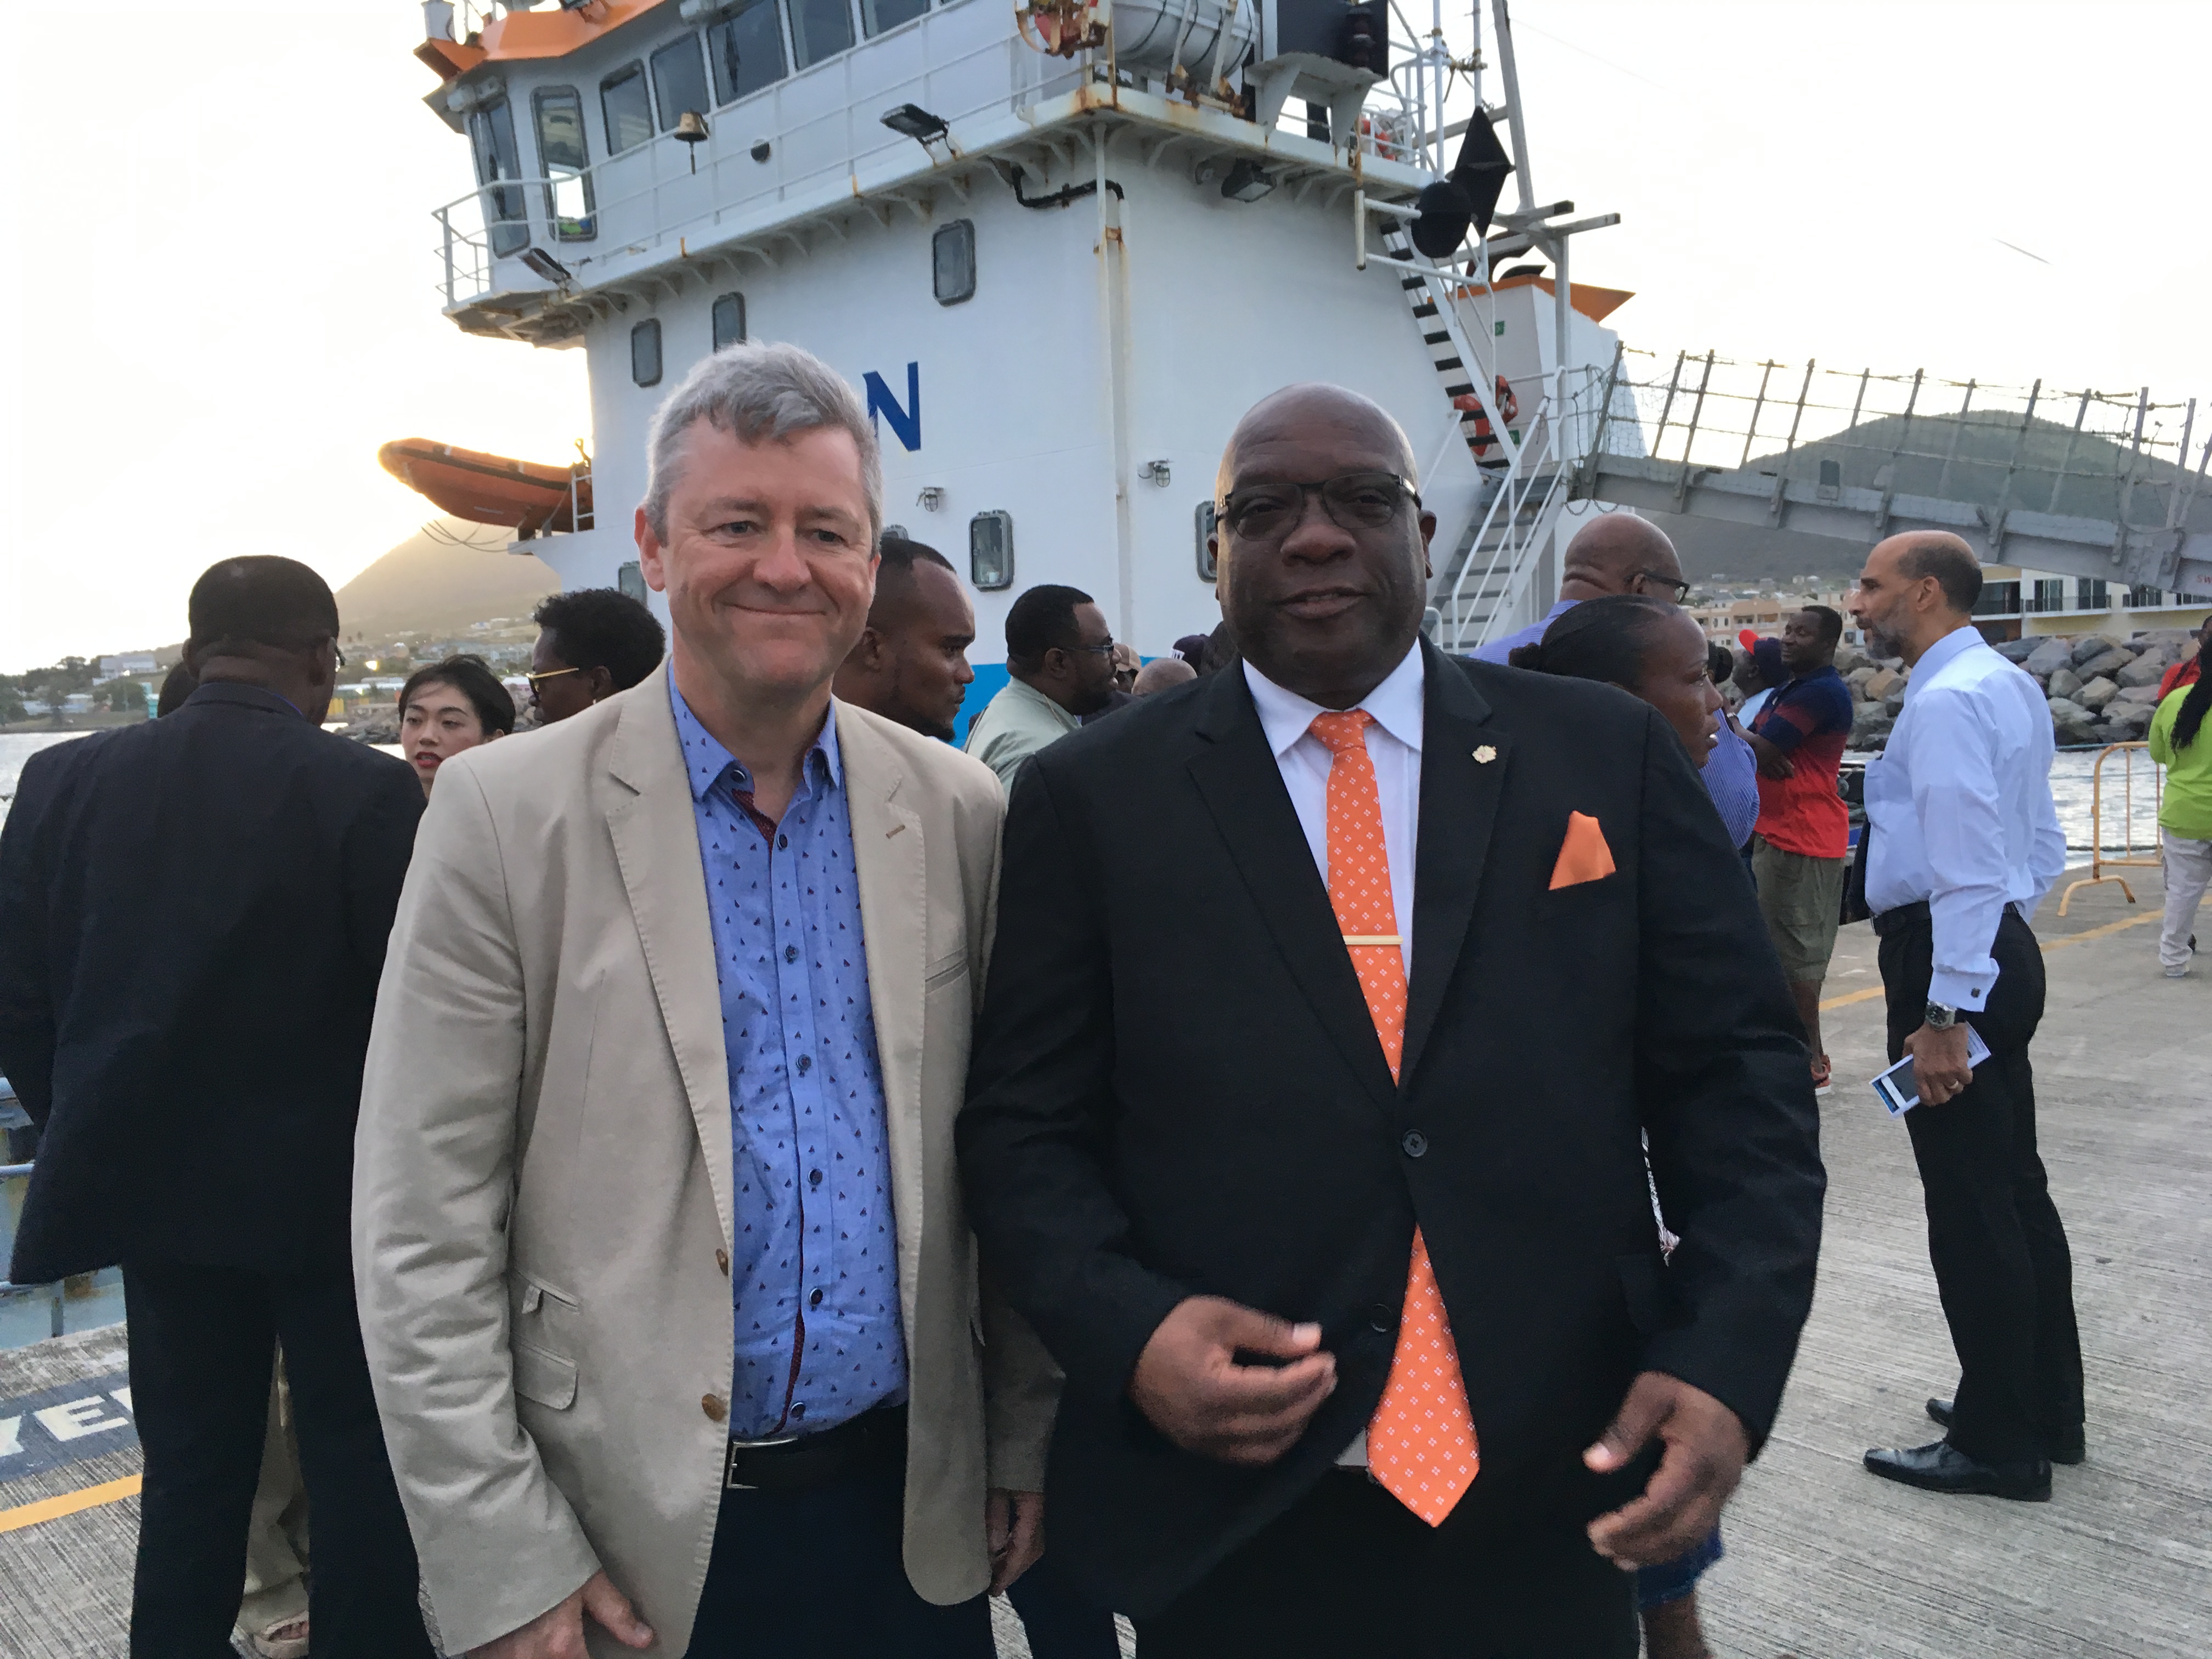 Launch of a new dredging project in the Caribbean for the JV DRIVER company